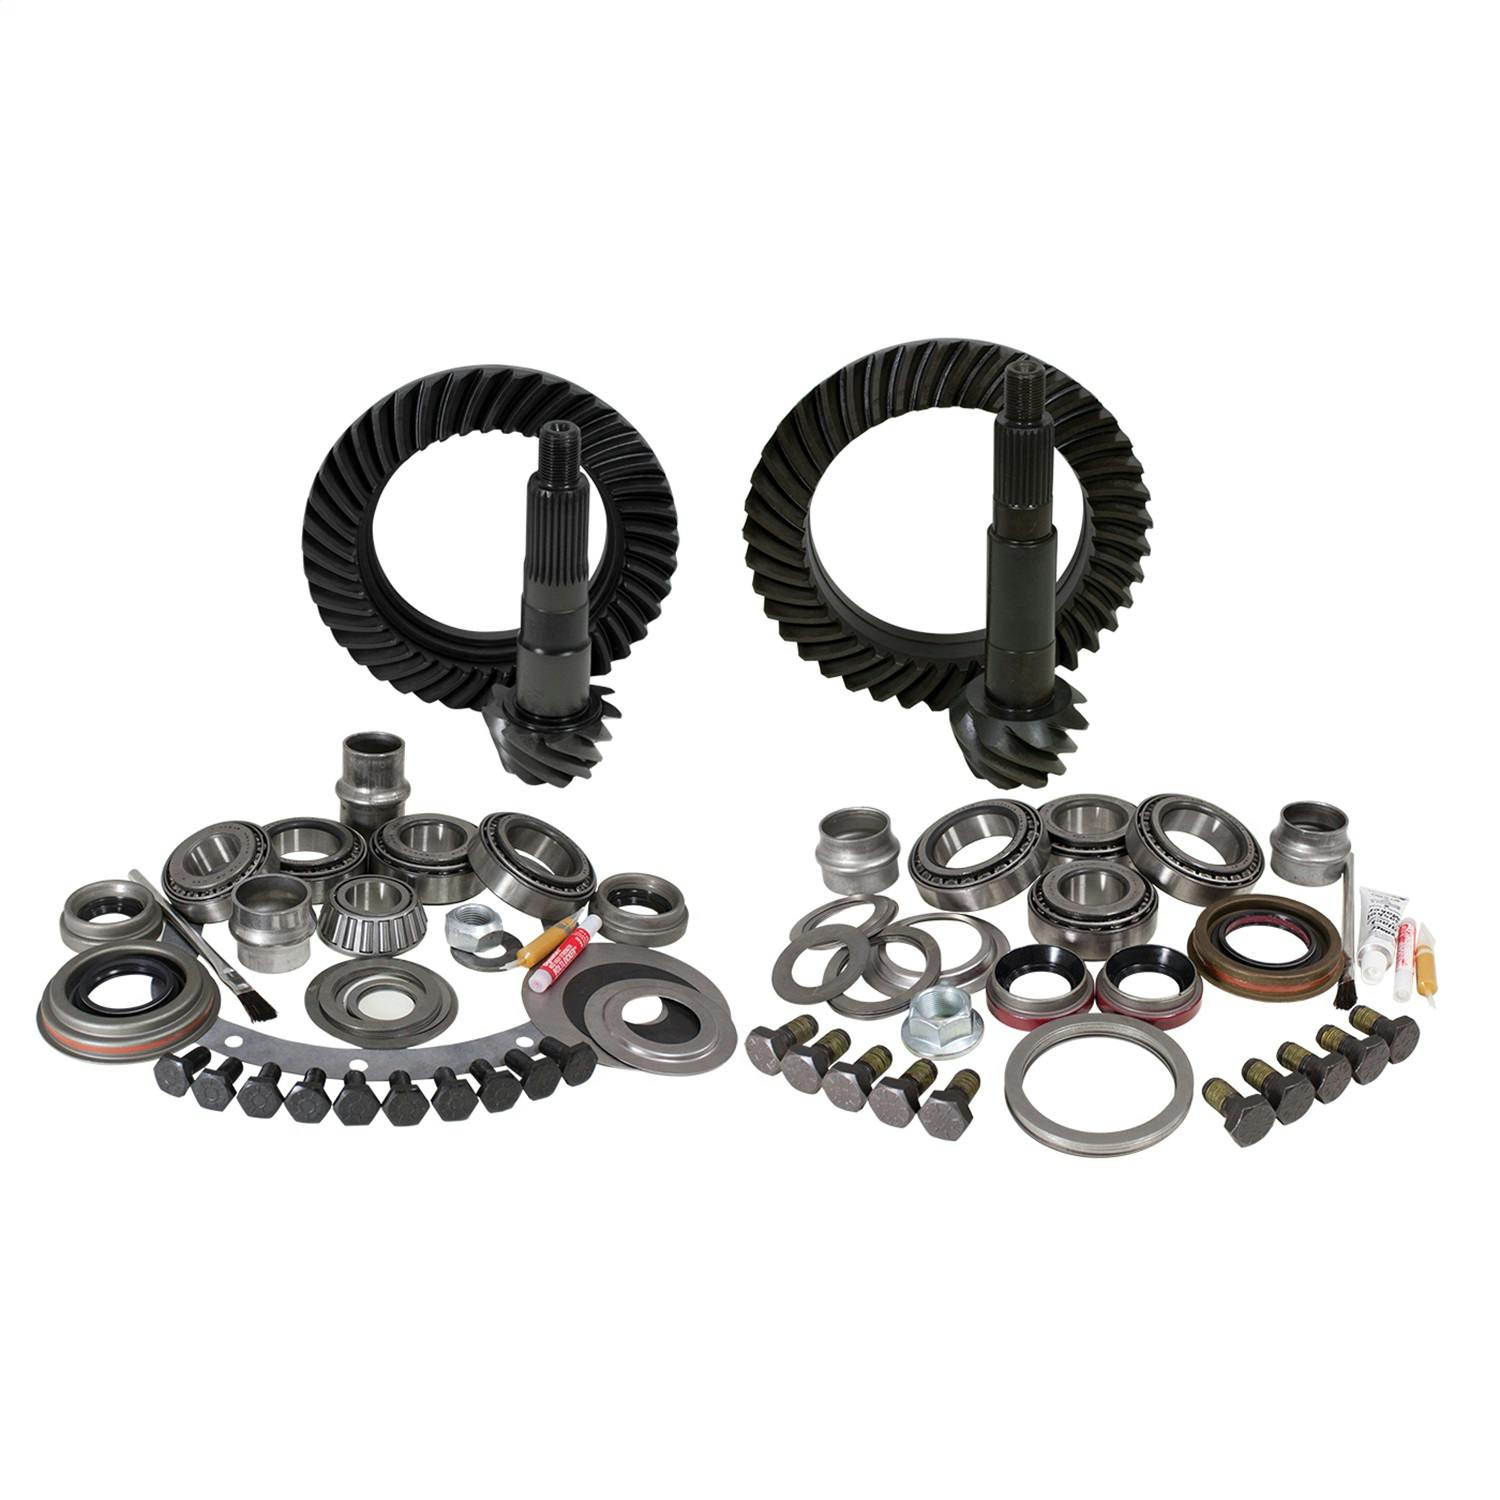 USA Standard Gear ZGK005 Ring And Pinion Set And Complete Install Kit